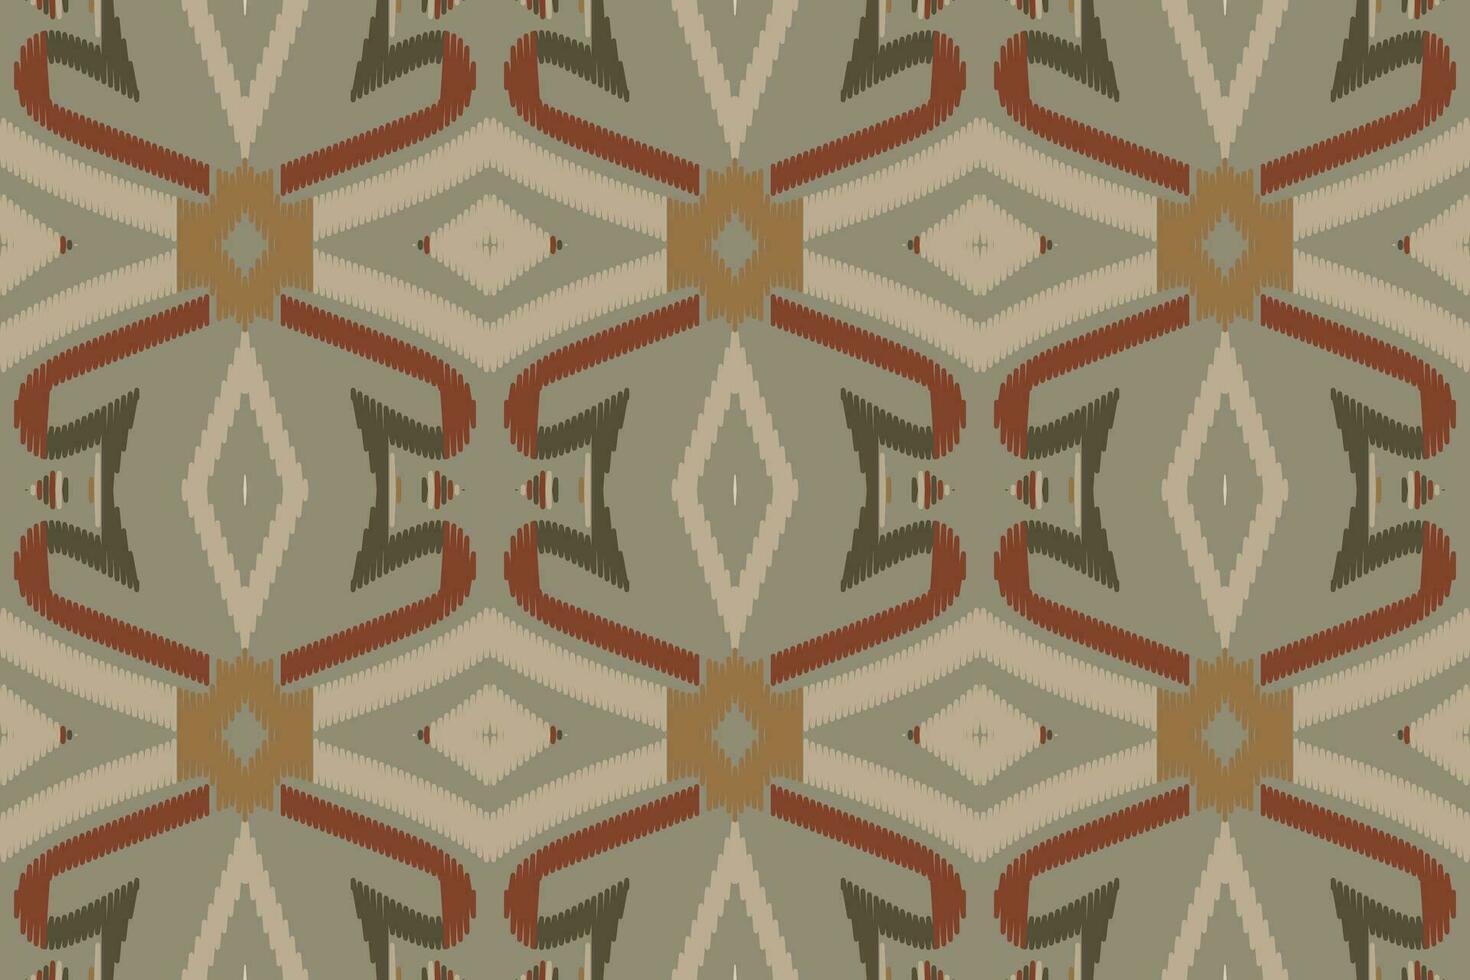 Ikat Paisley Pattern Embroidery Background. Ikat Background Geometric Ethnic Oriental Pattern Traditional. Ikat Aztec Style Abstract Design for Print Texture,fabric,saree,sari,carpet. vector